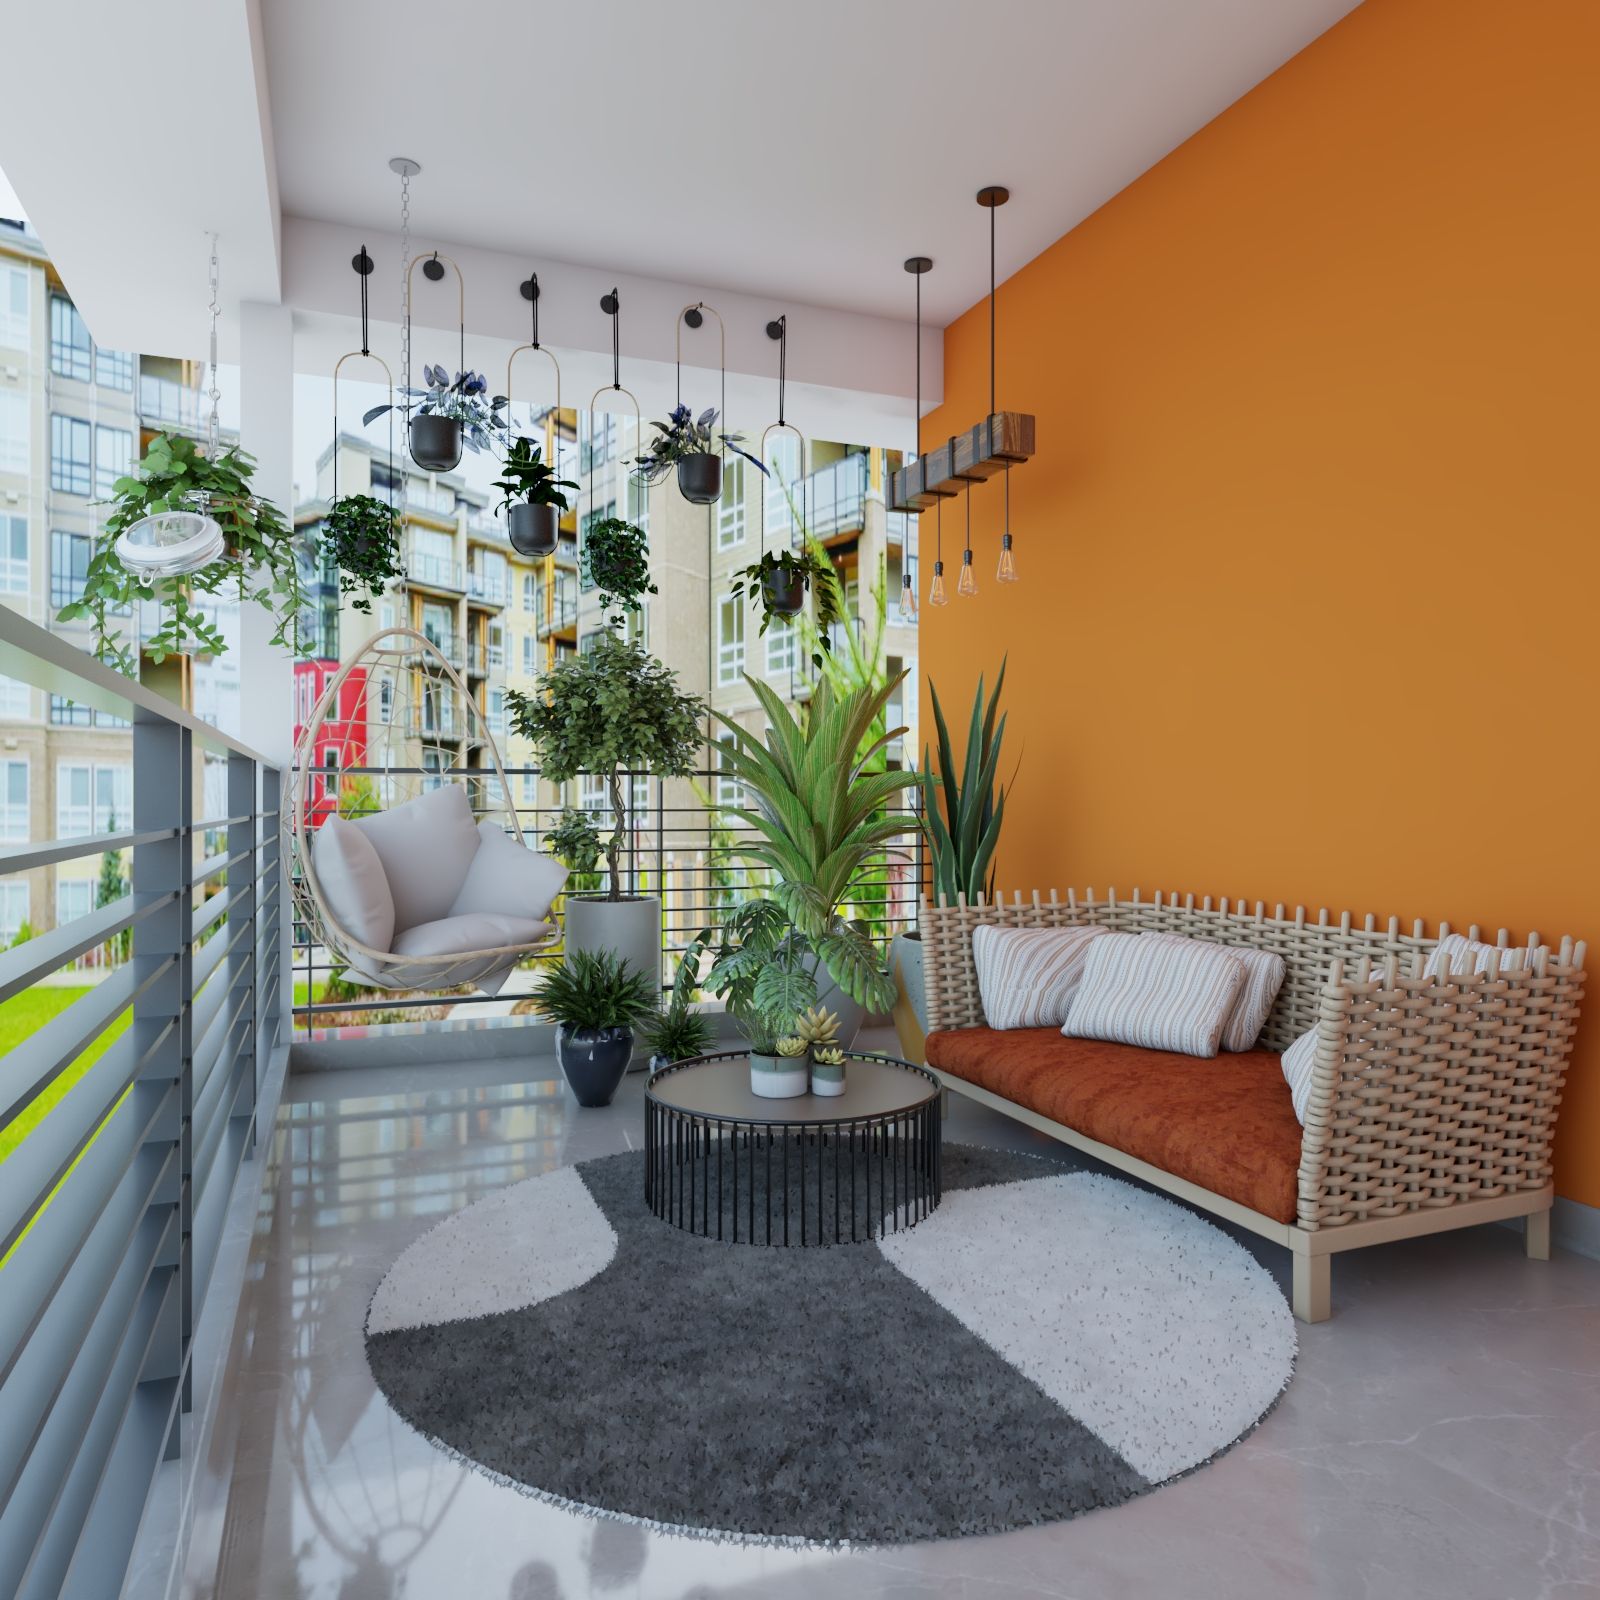 Tropical Balcony Design With Orange Wall Paint